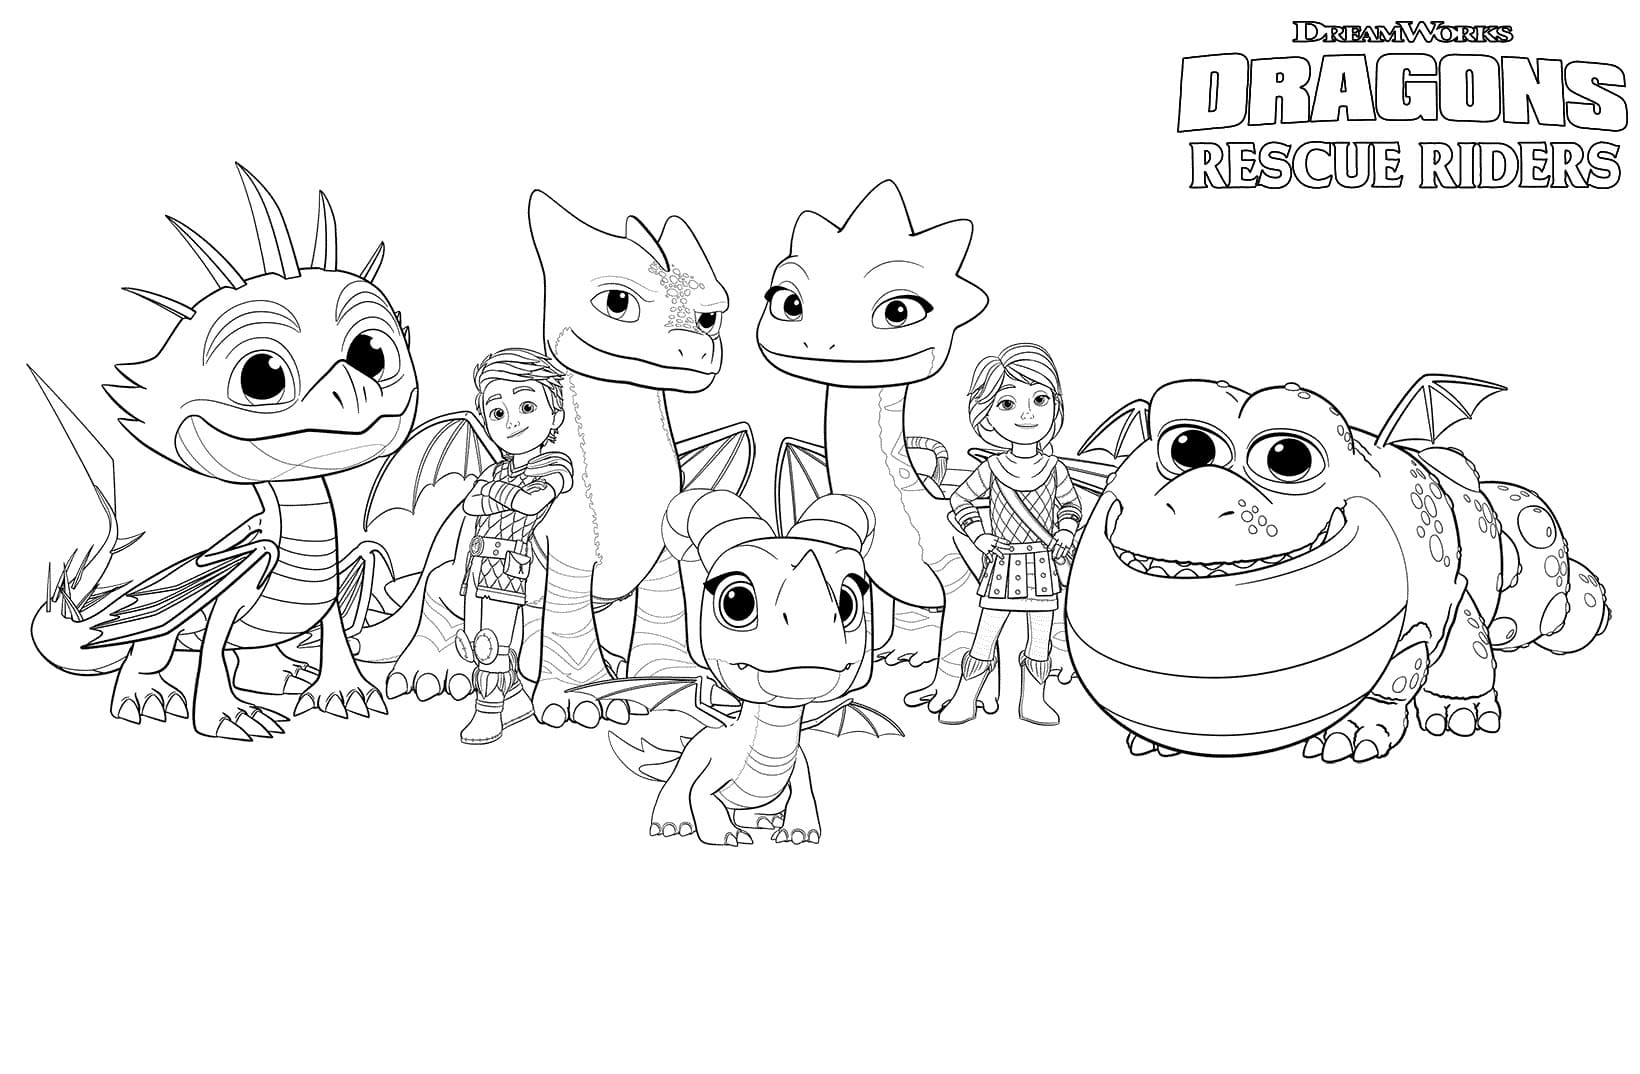 Dragons Rescue Riders to Color Coloring Page - Free Printable Coloring Pages  for Kids